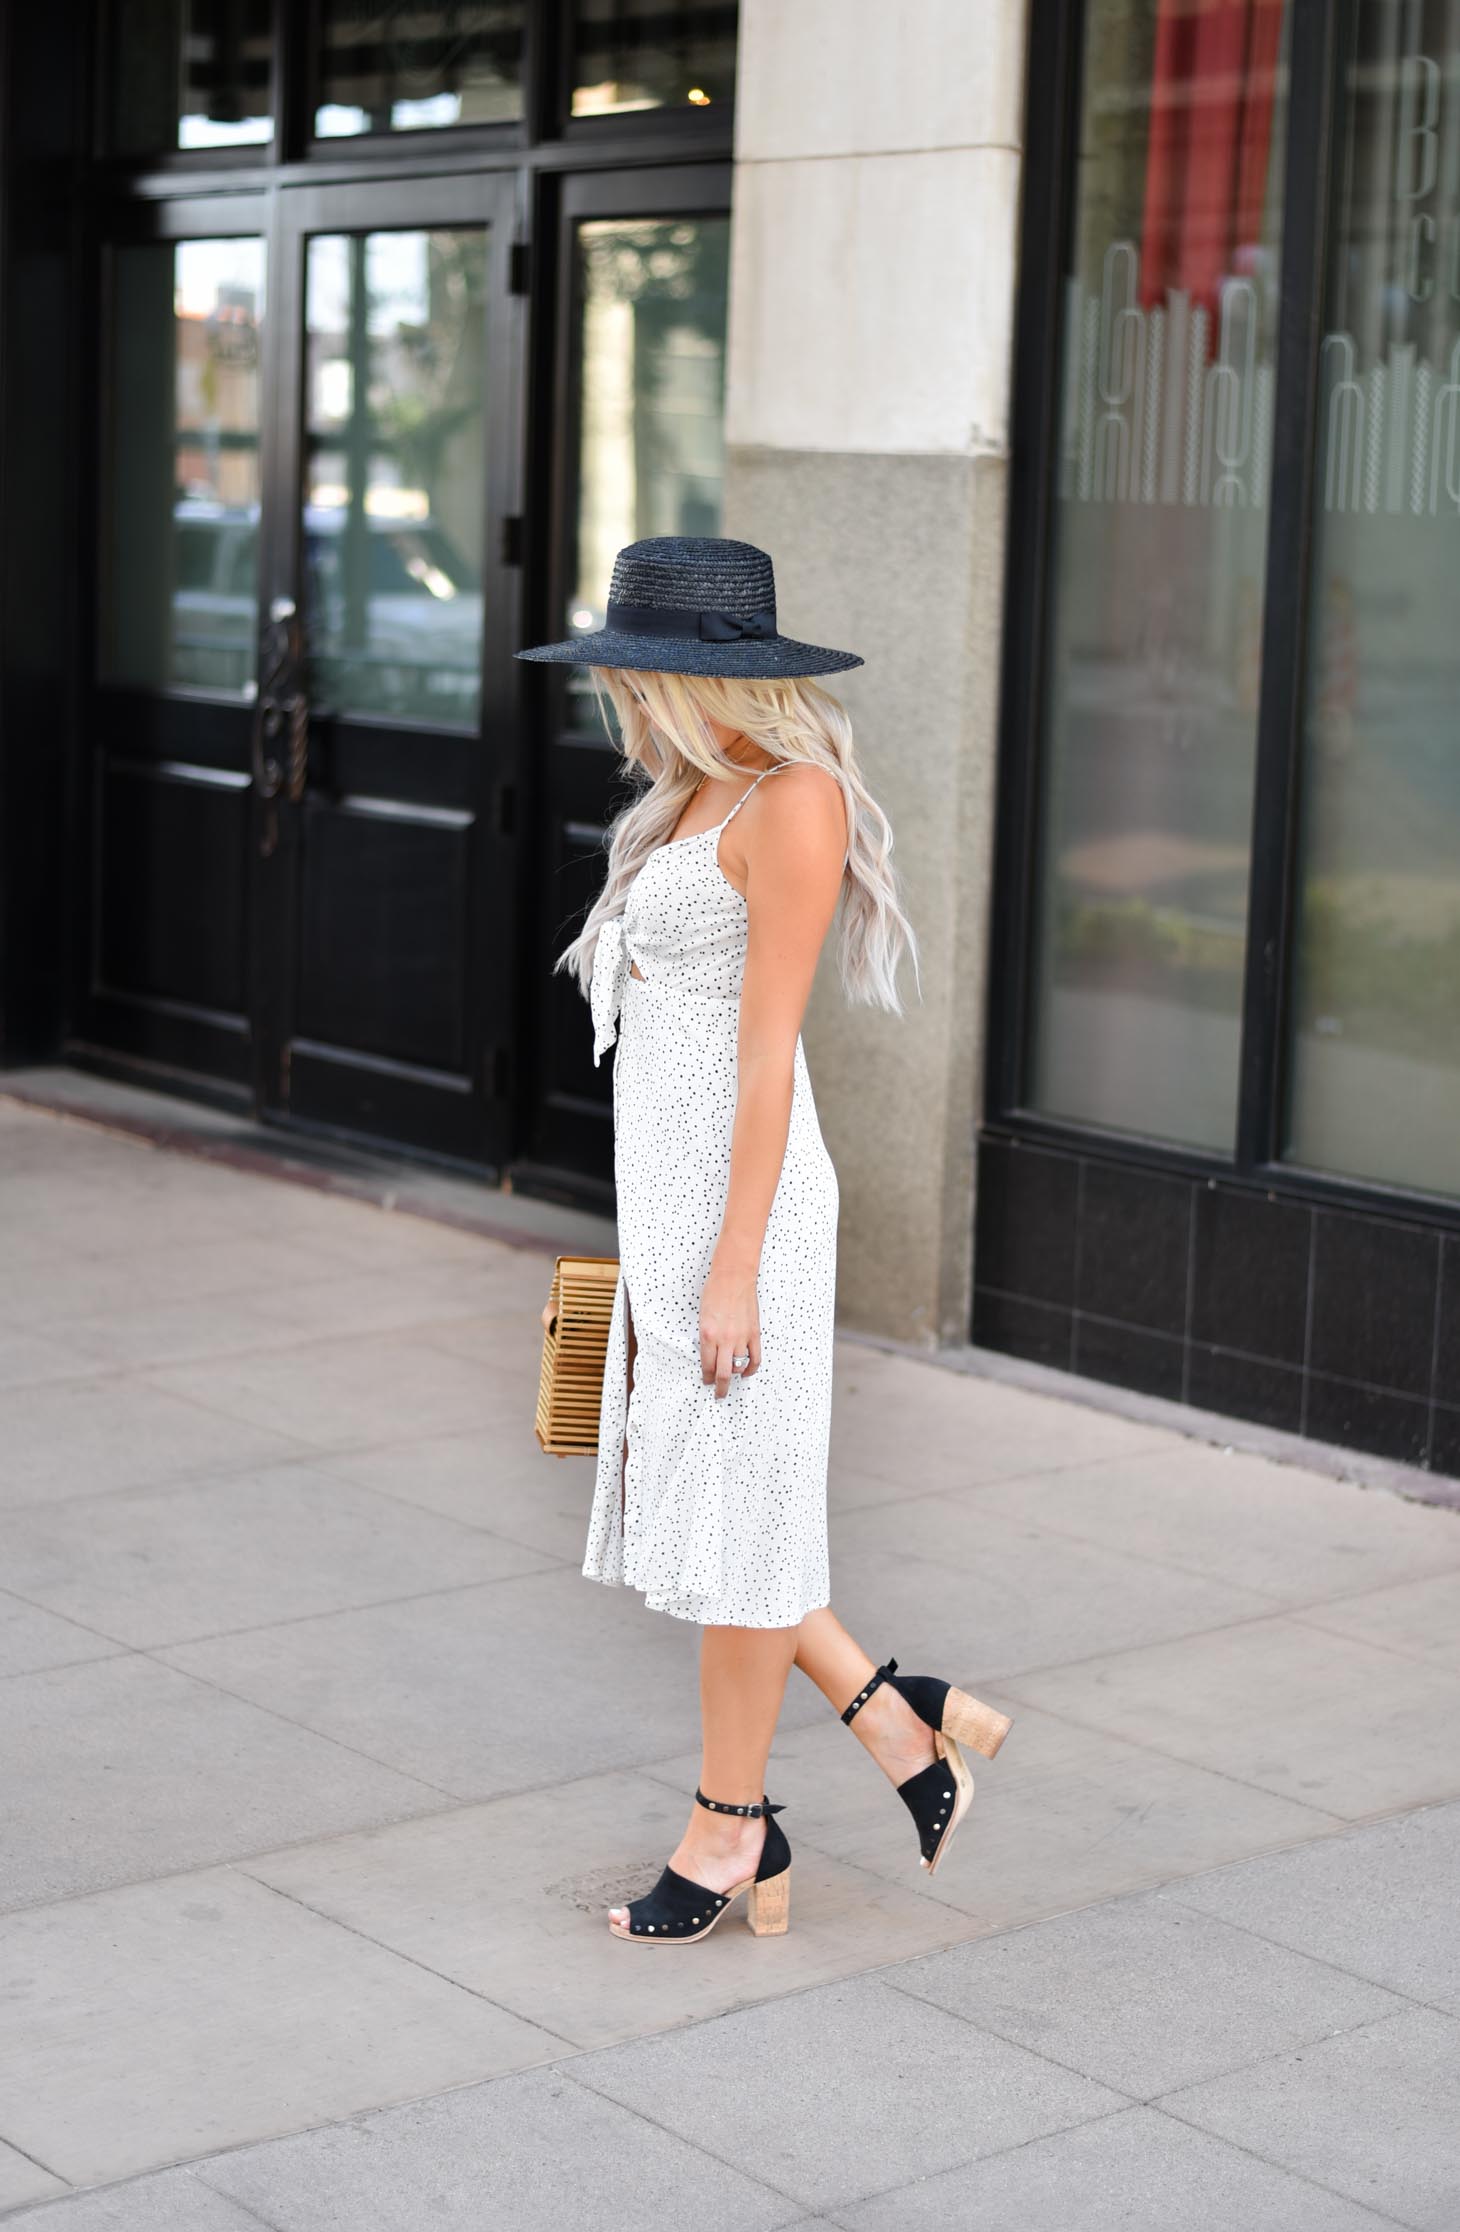 Erin Elizabeth of Wink and a Twirl shares the sweetest polka dot dress from Shop Entourage in Downtown Phoenix